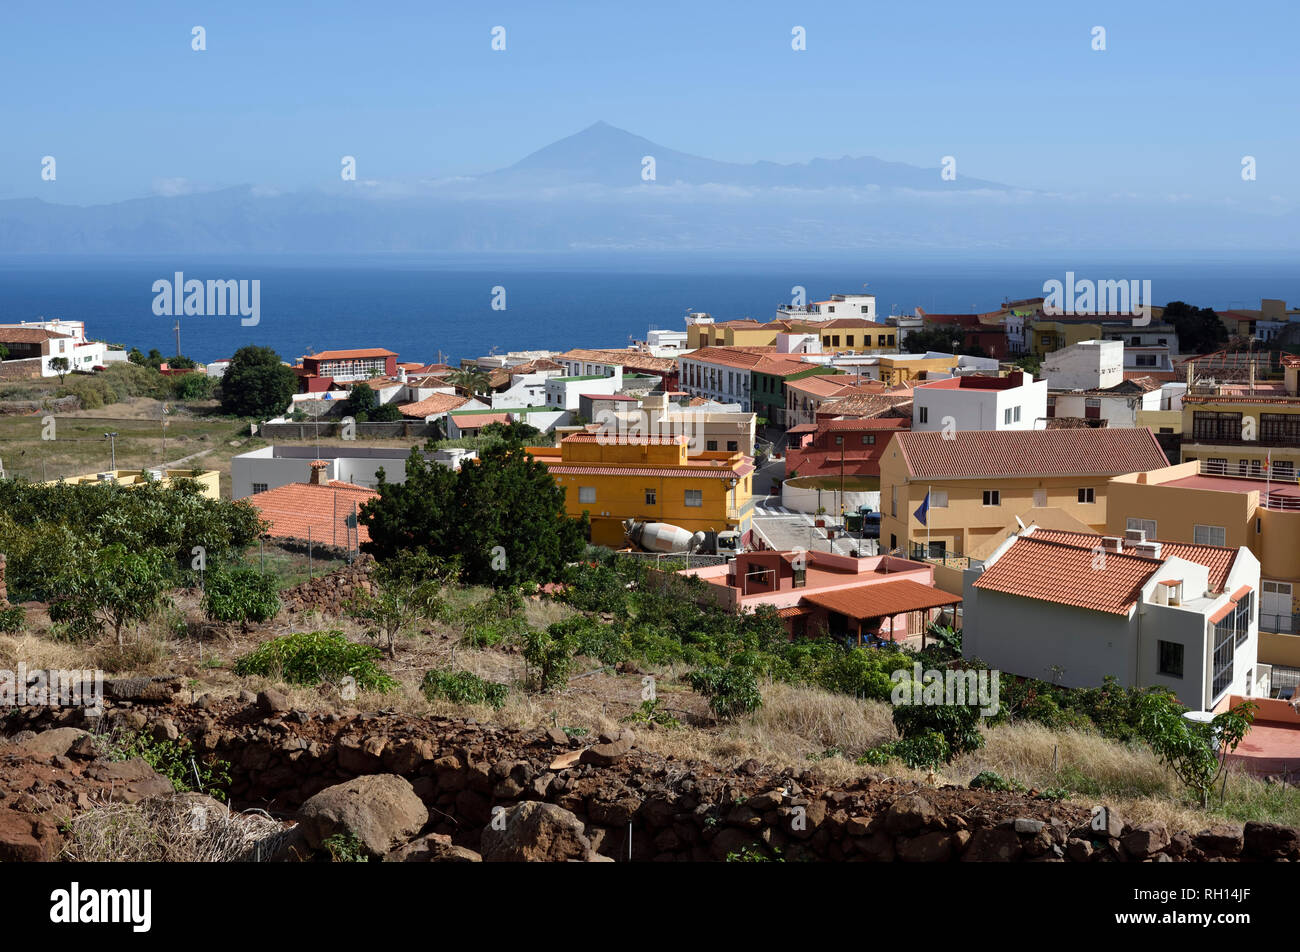 view of the Teide on Teneriffa from the village Agulo, La Gomera, Canary Islands, Spain Stock Photo